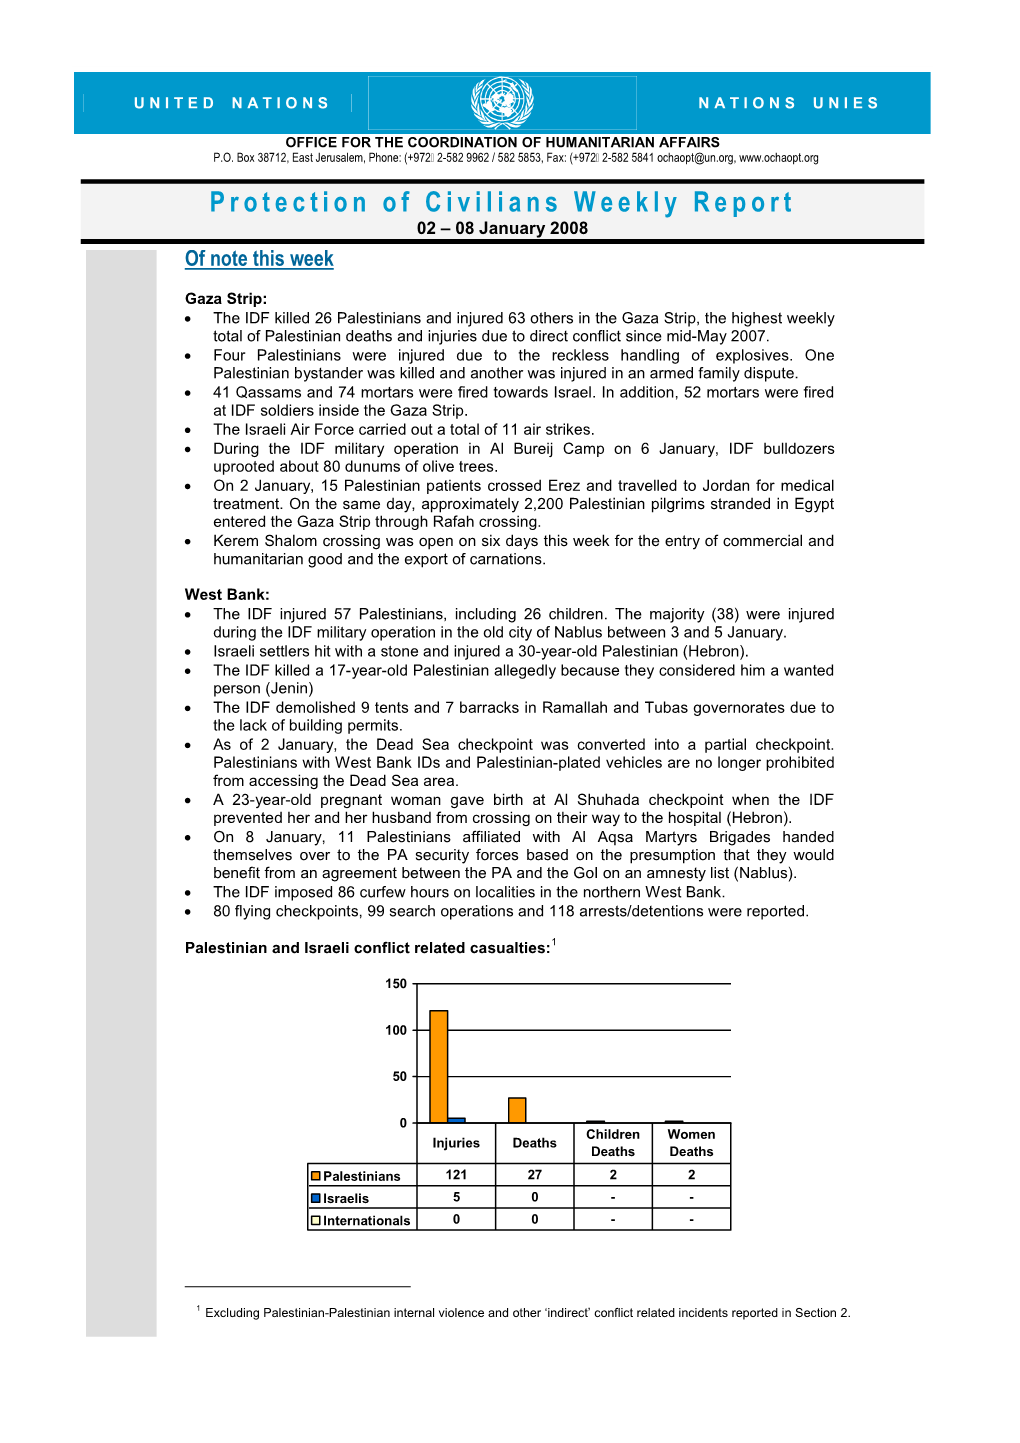 Protection of Civilians Weekly Report 02 – 08 January 2008 of Note This Week